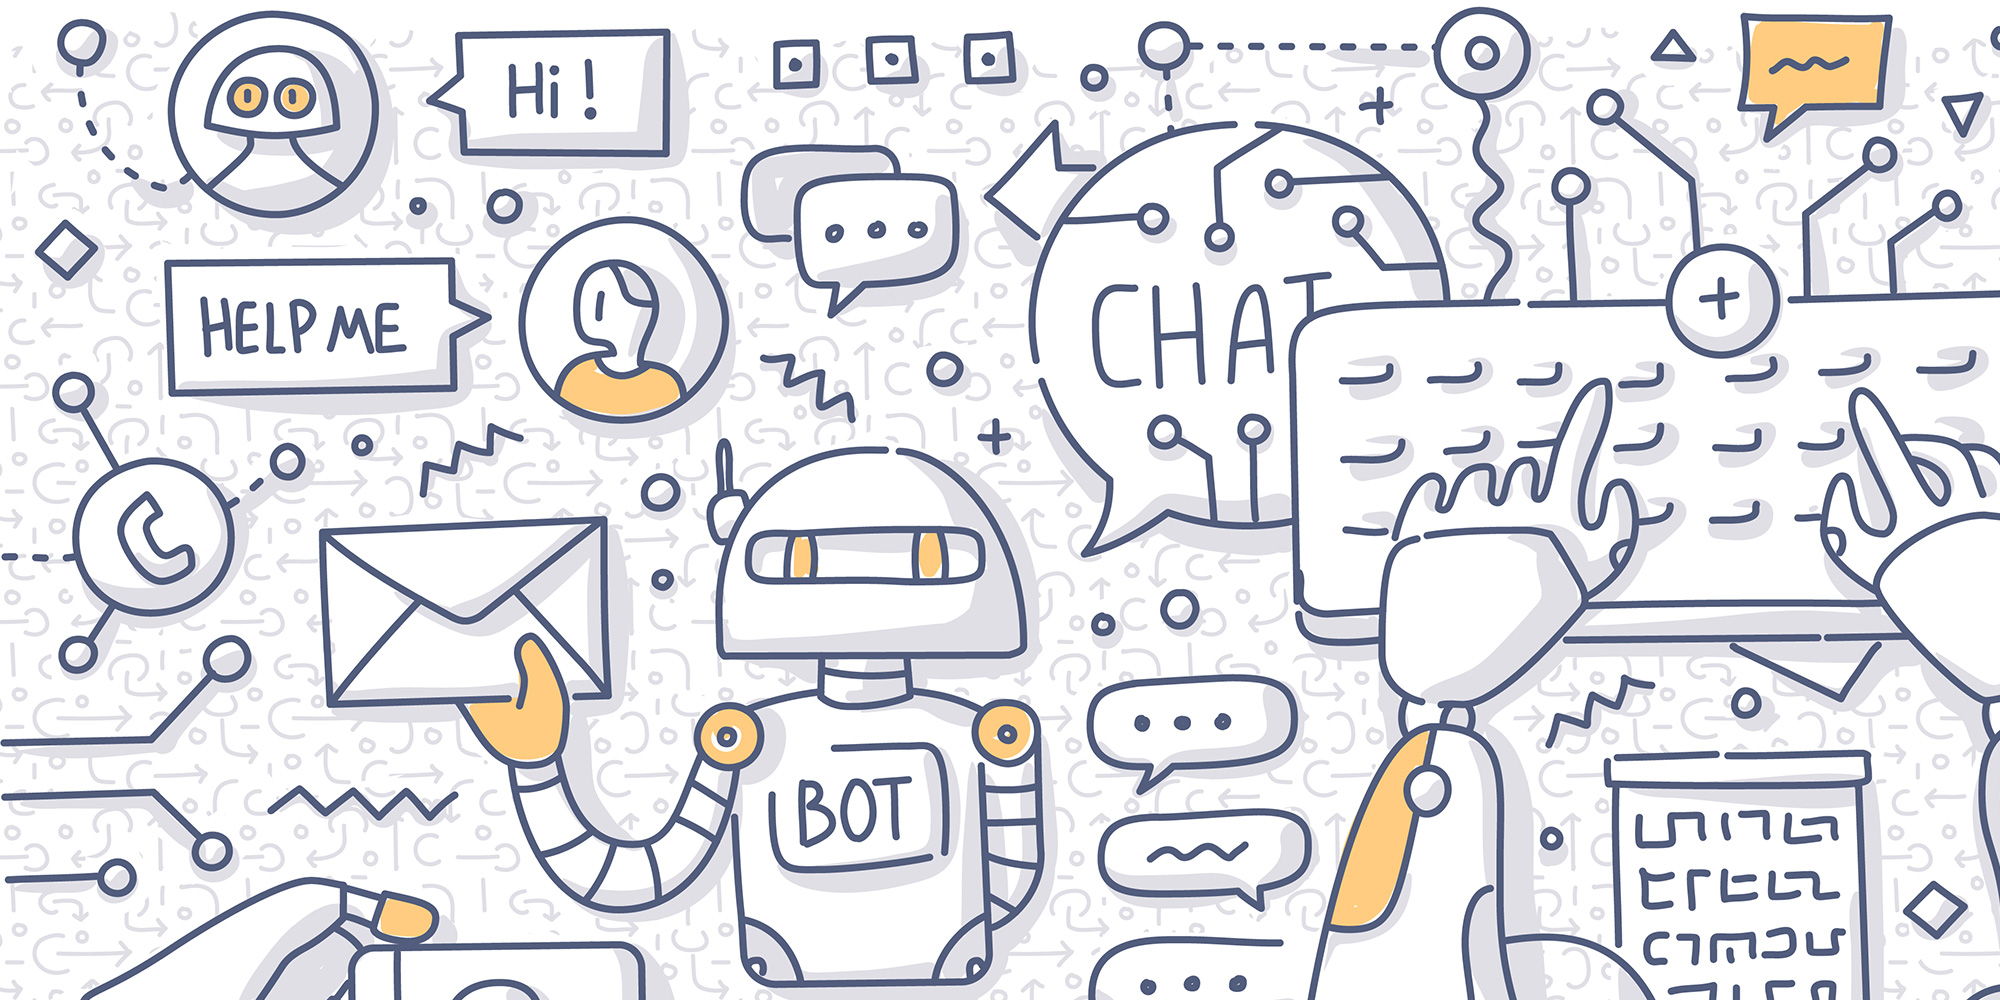 Illustration of Online Conversations and Chatbots